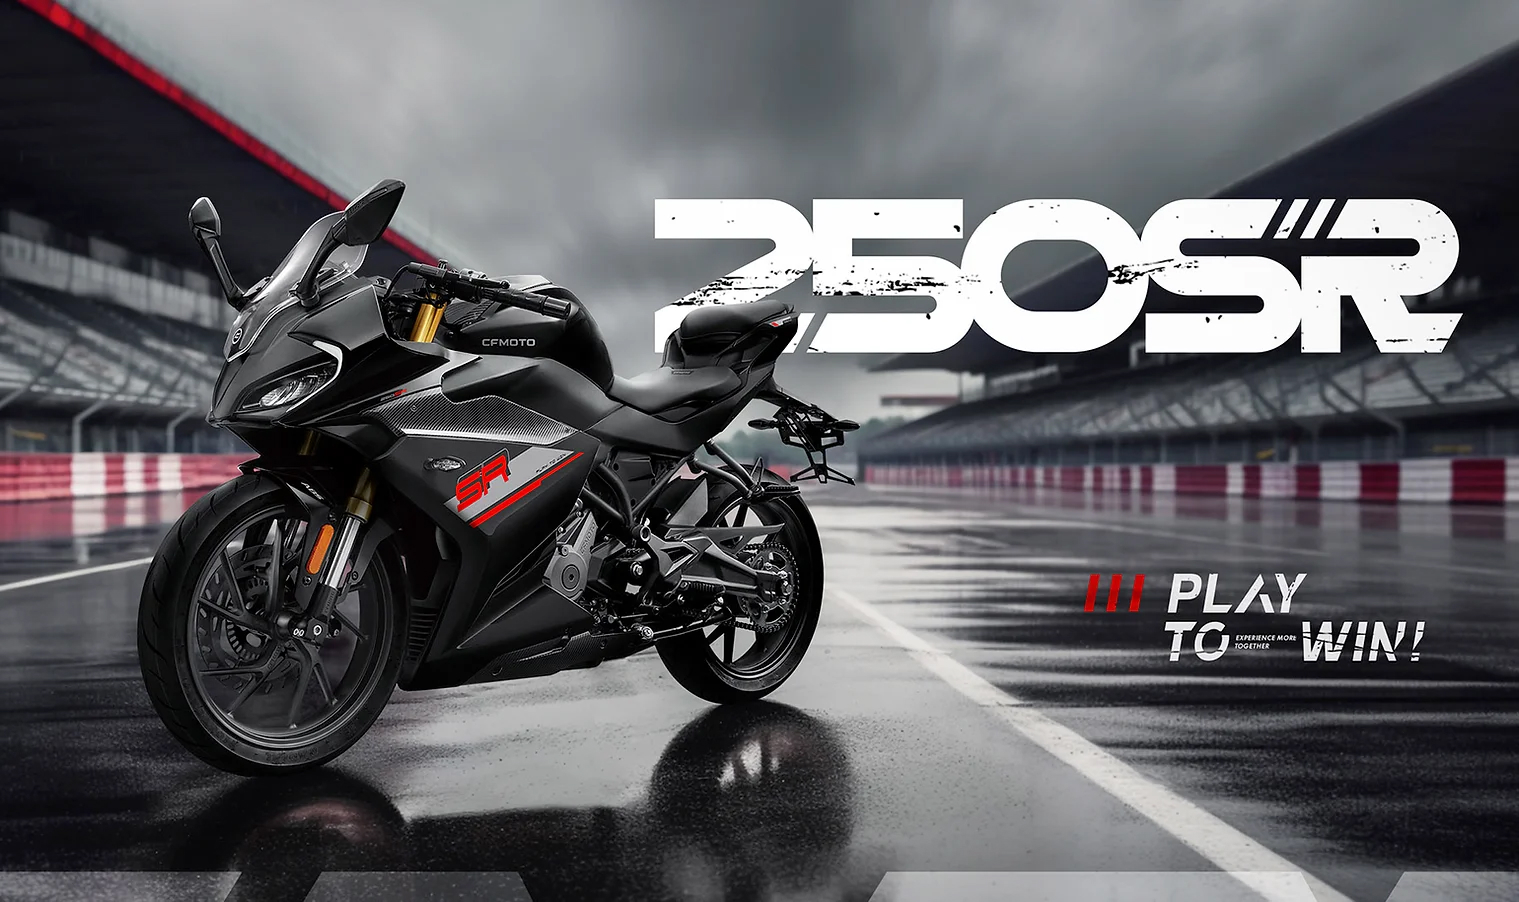 2024 CFMOTO 250SR: The fully faired sports bike re-enters the Nepali market